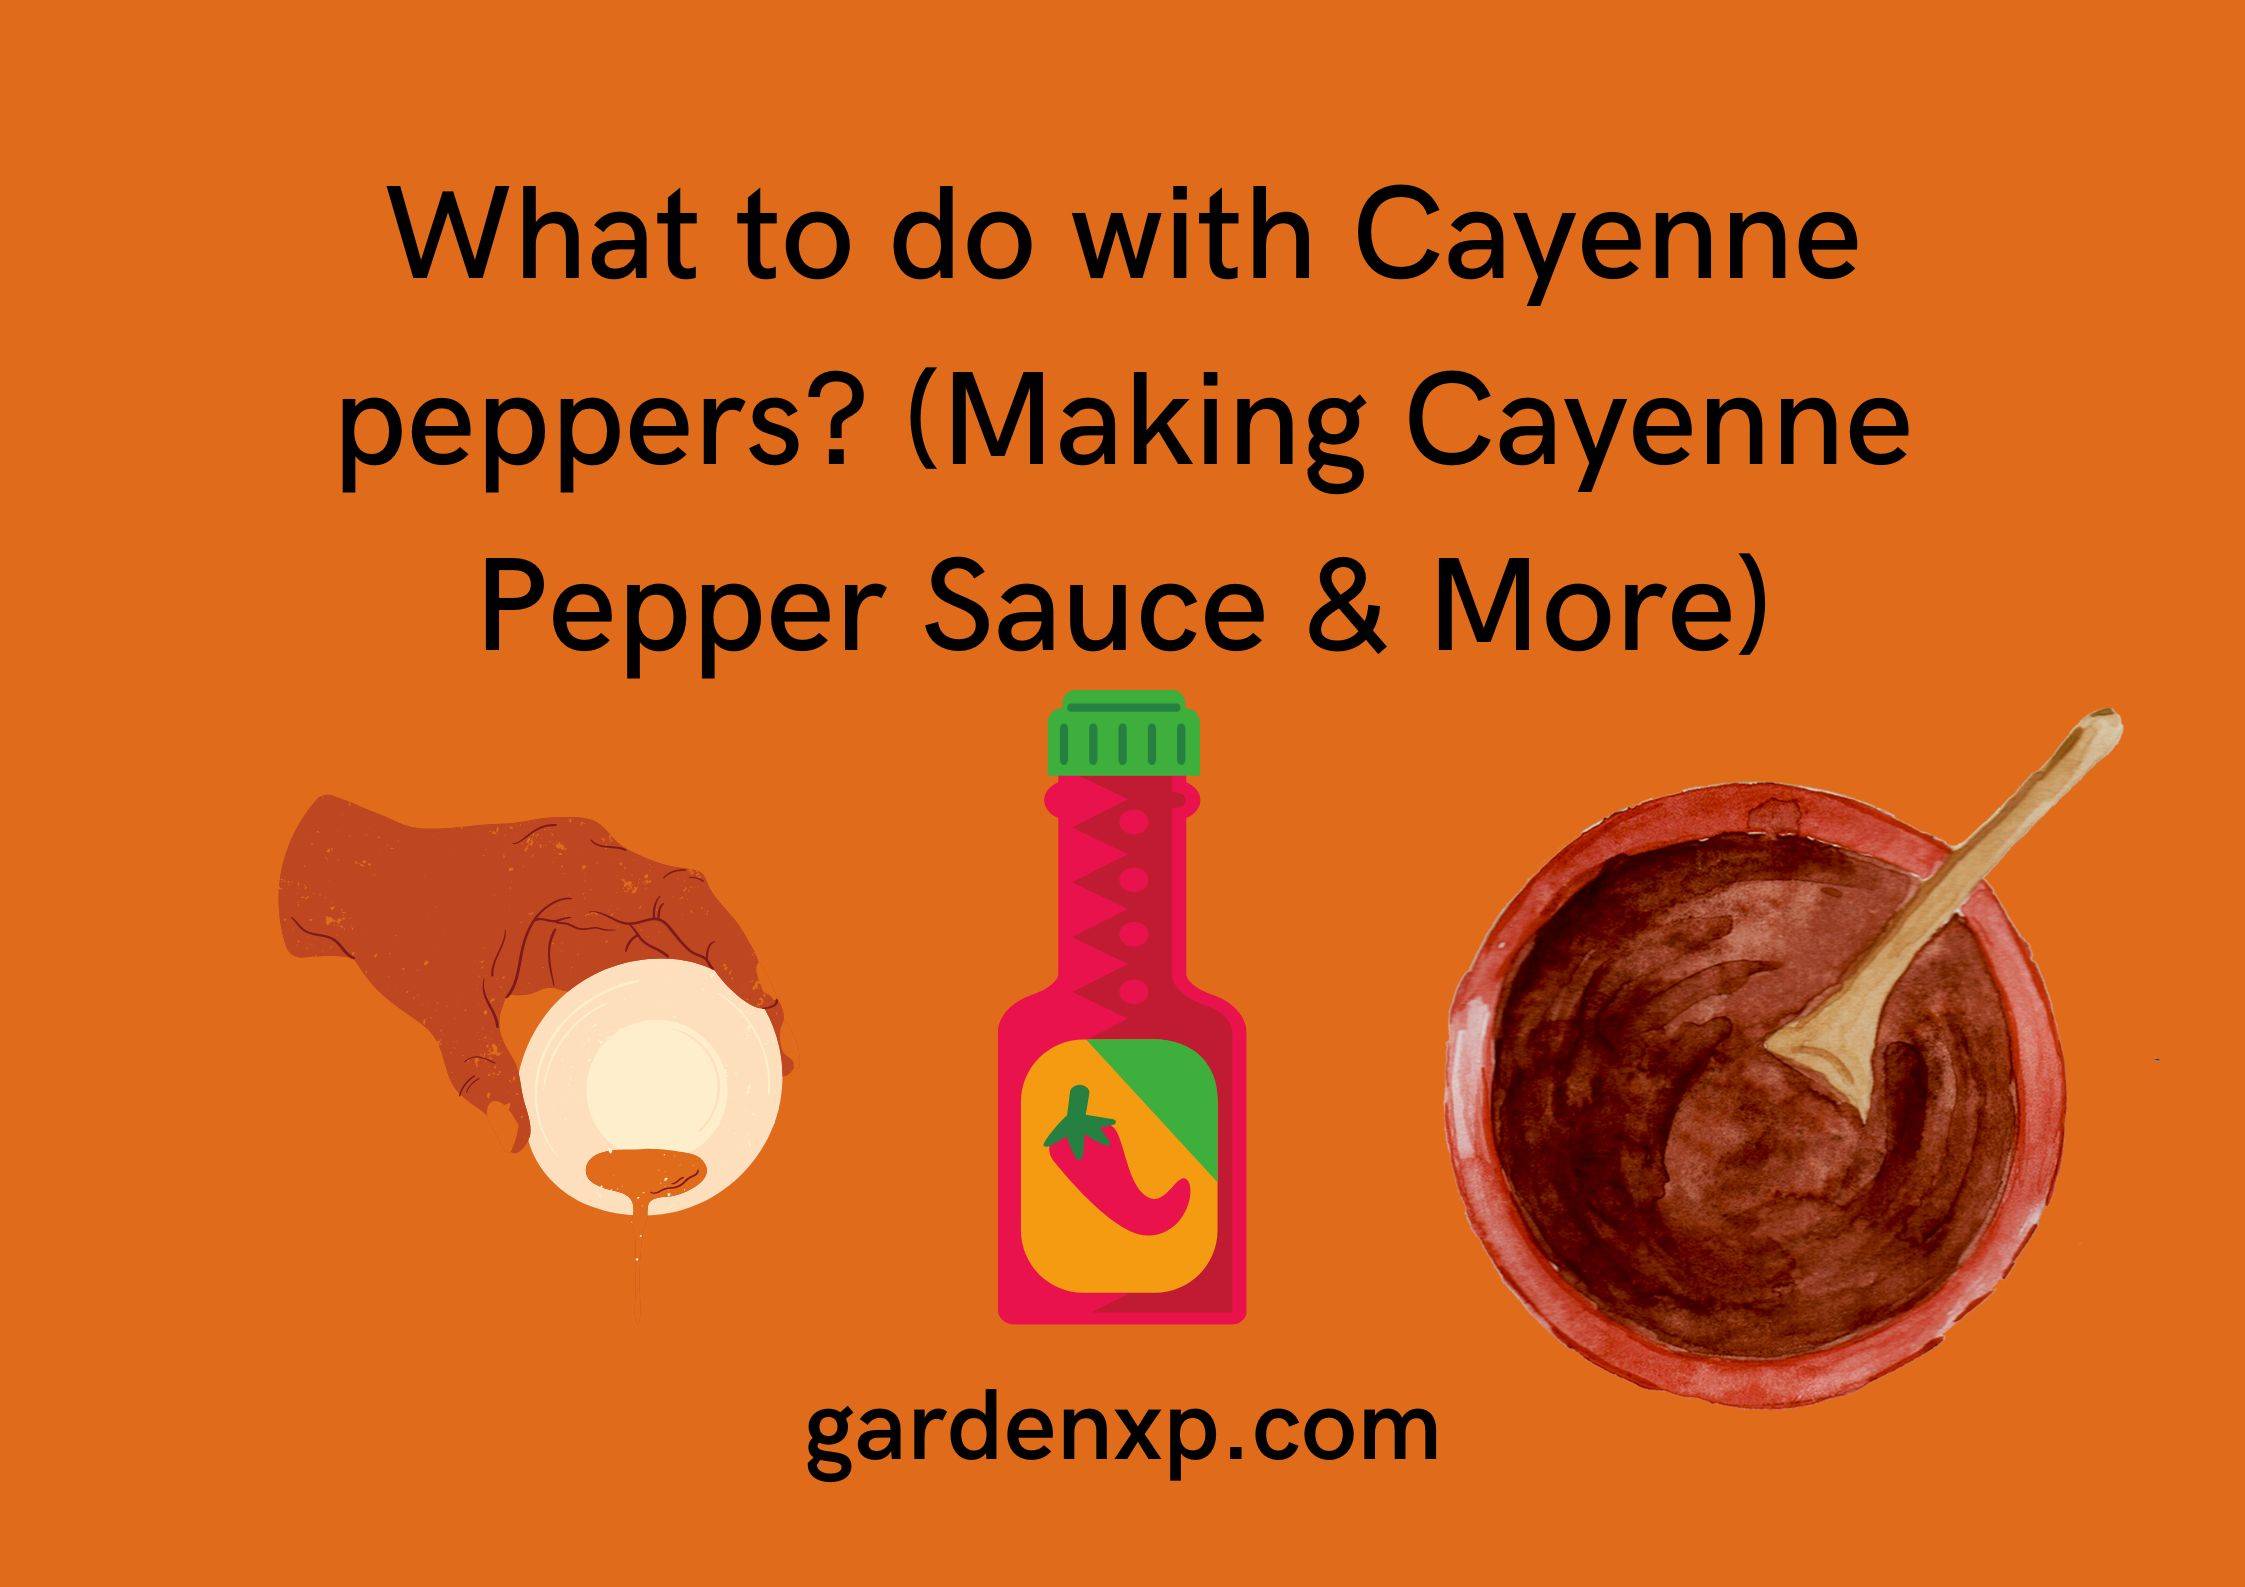 What to do with cayenne peppers? (Making Cayenne Pepper Sauce & More)